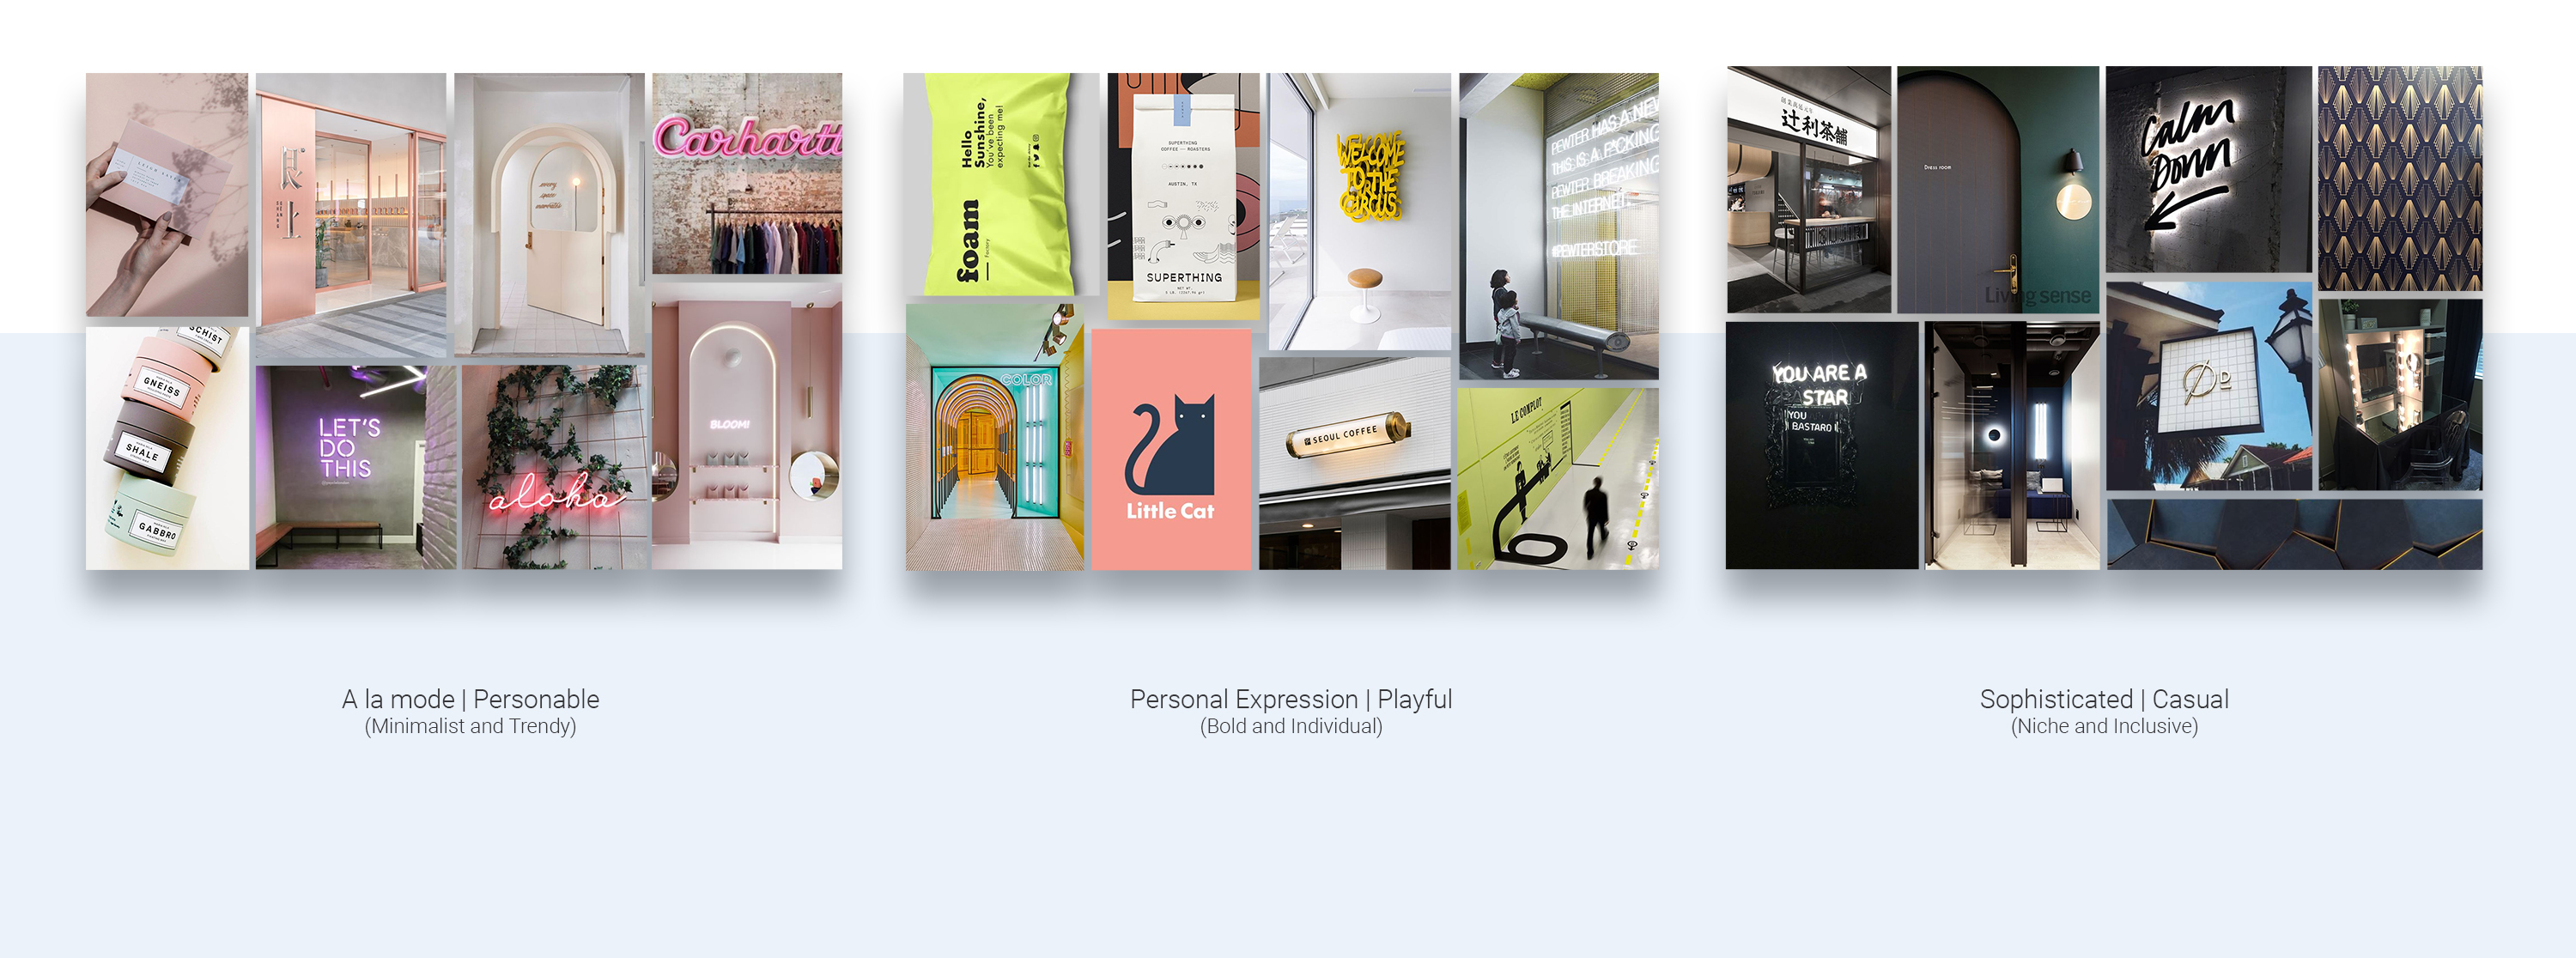 moodboards with 3 different concepts for the brand (from left-right: personable, playful, and casual)